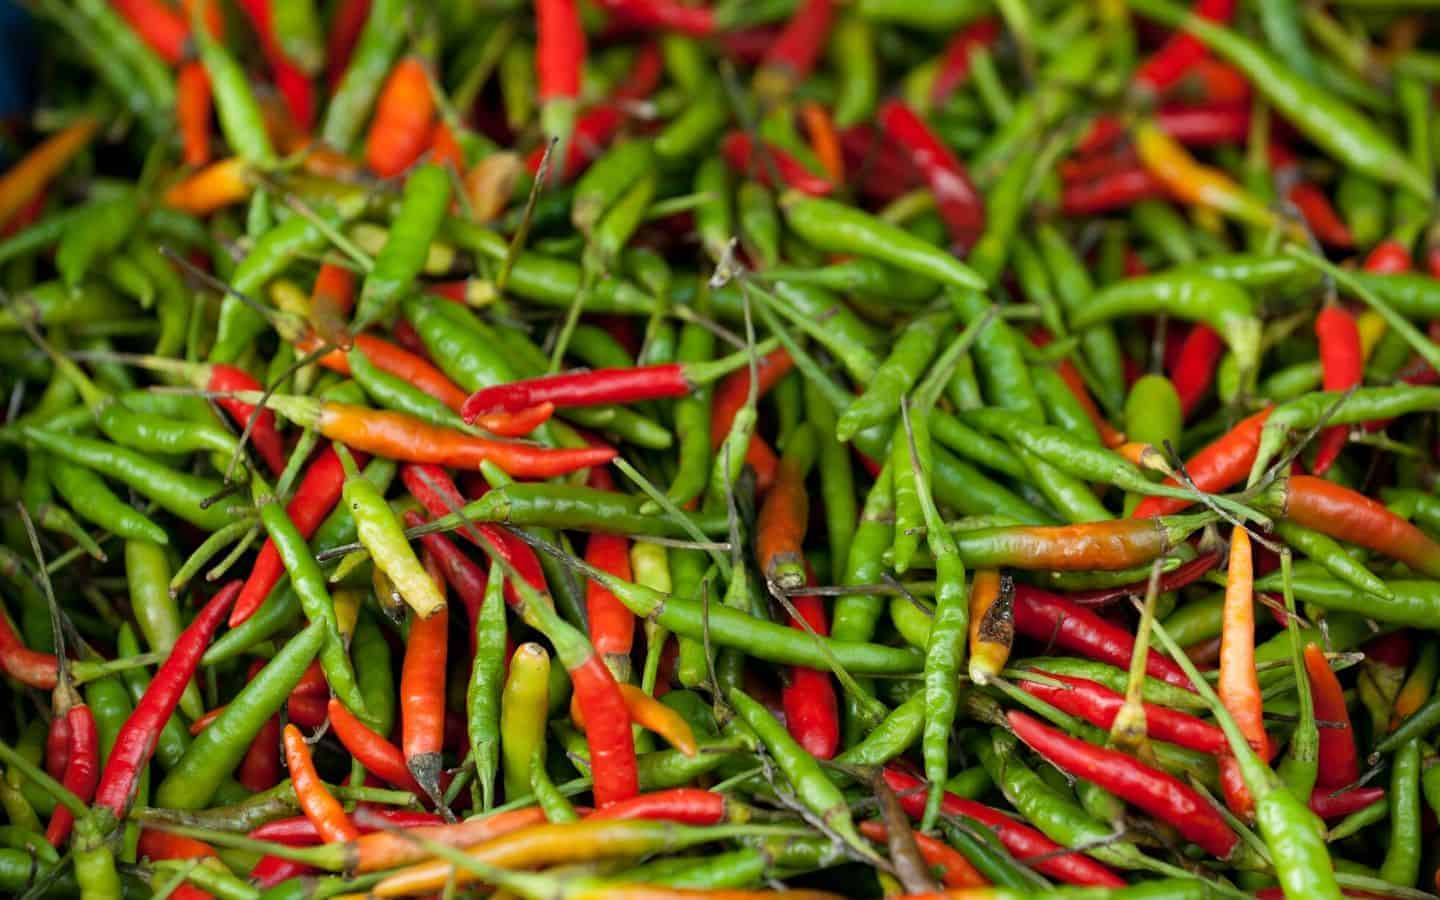 Loads of red and green bird eye chillies